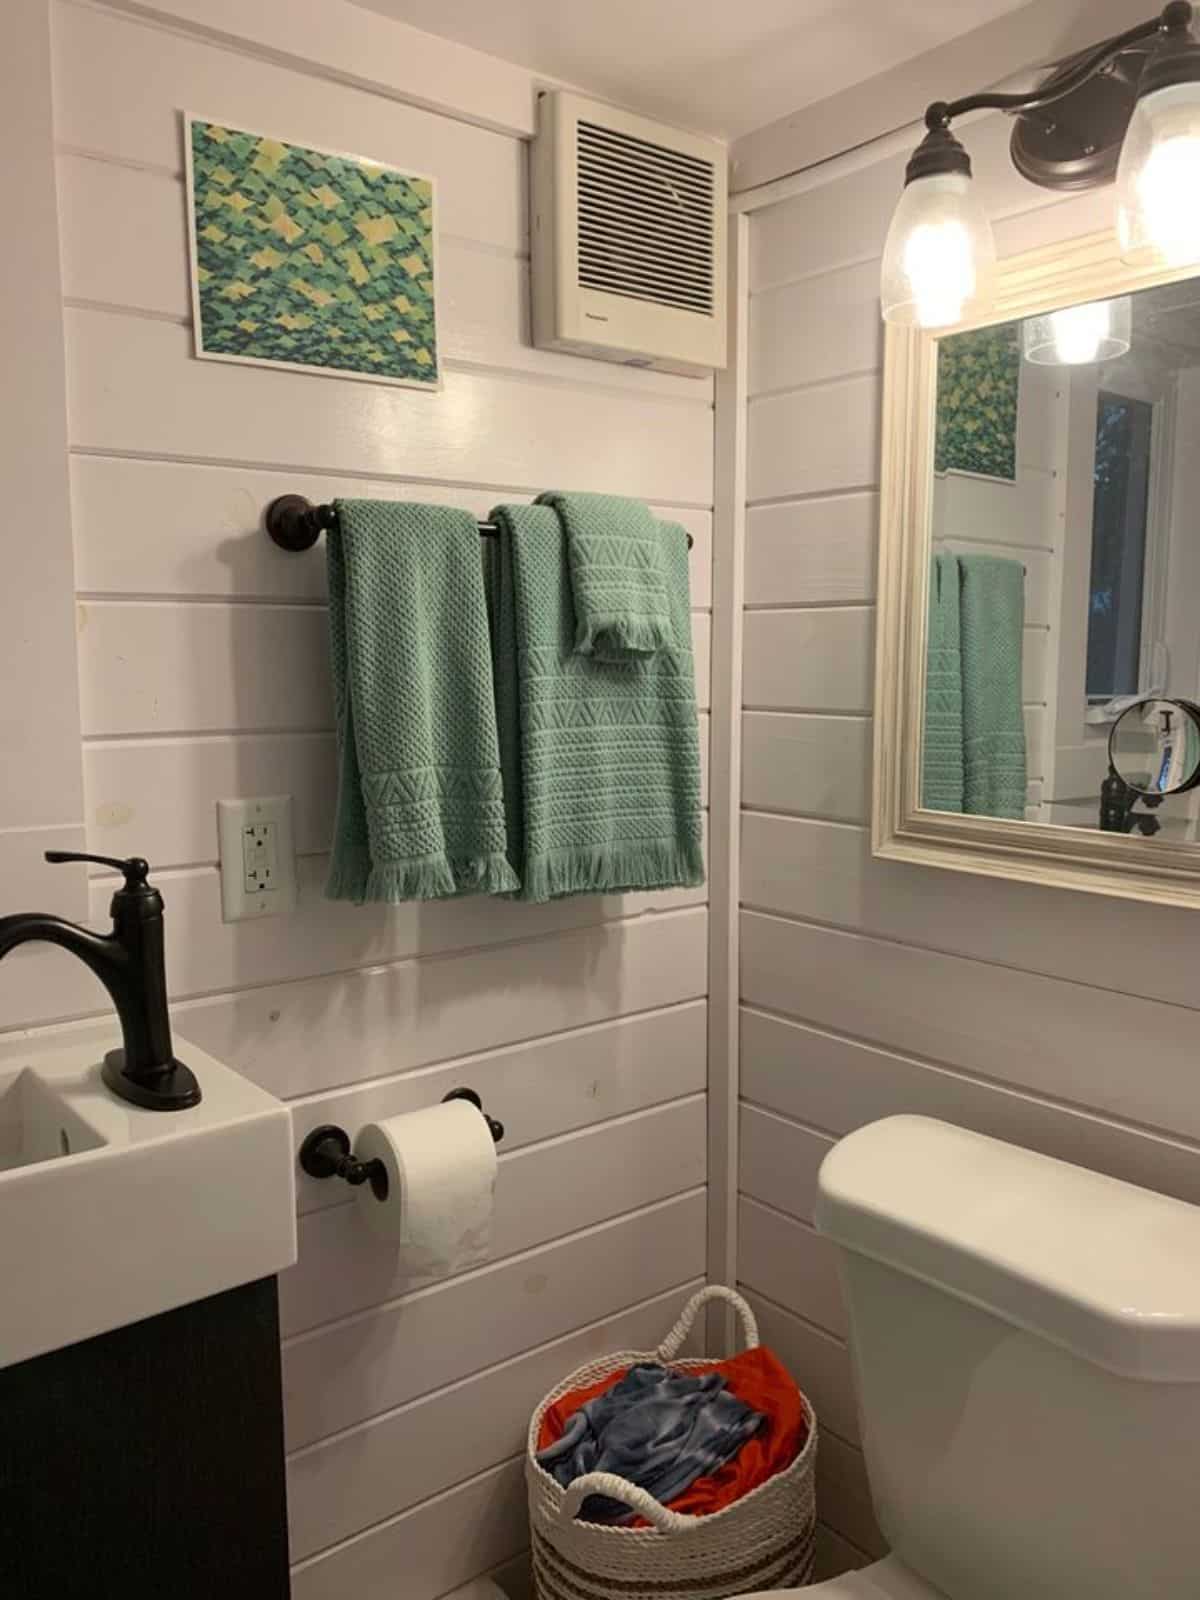 bathroom of furnished tiny home has all the standard fittings